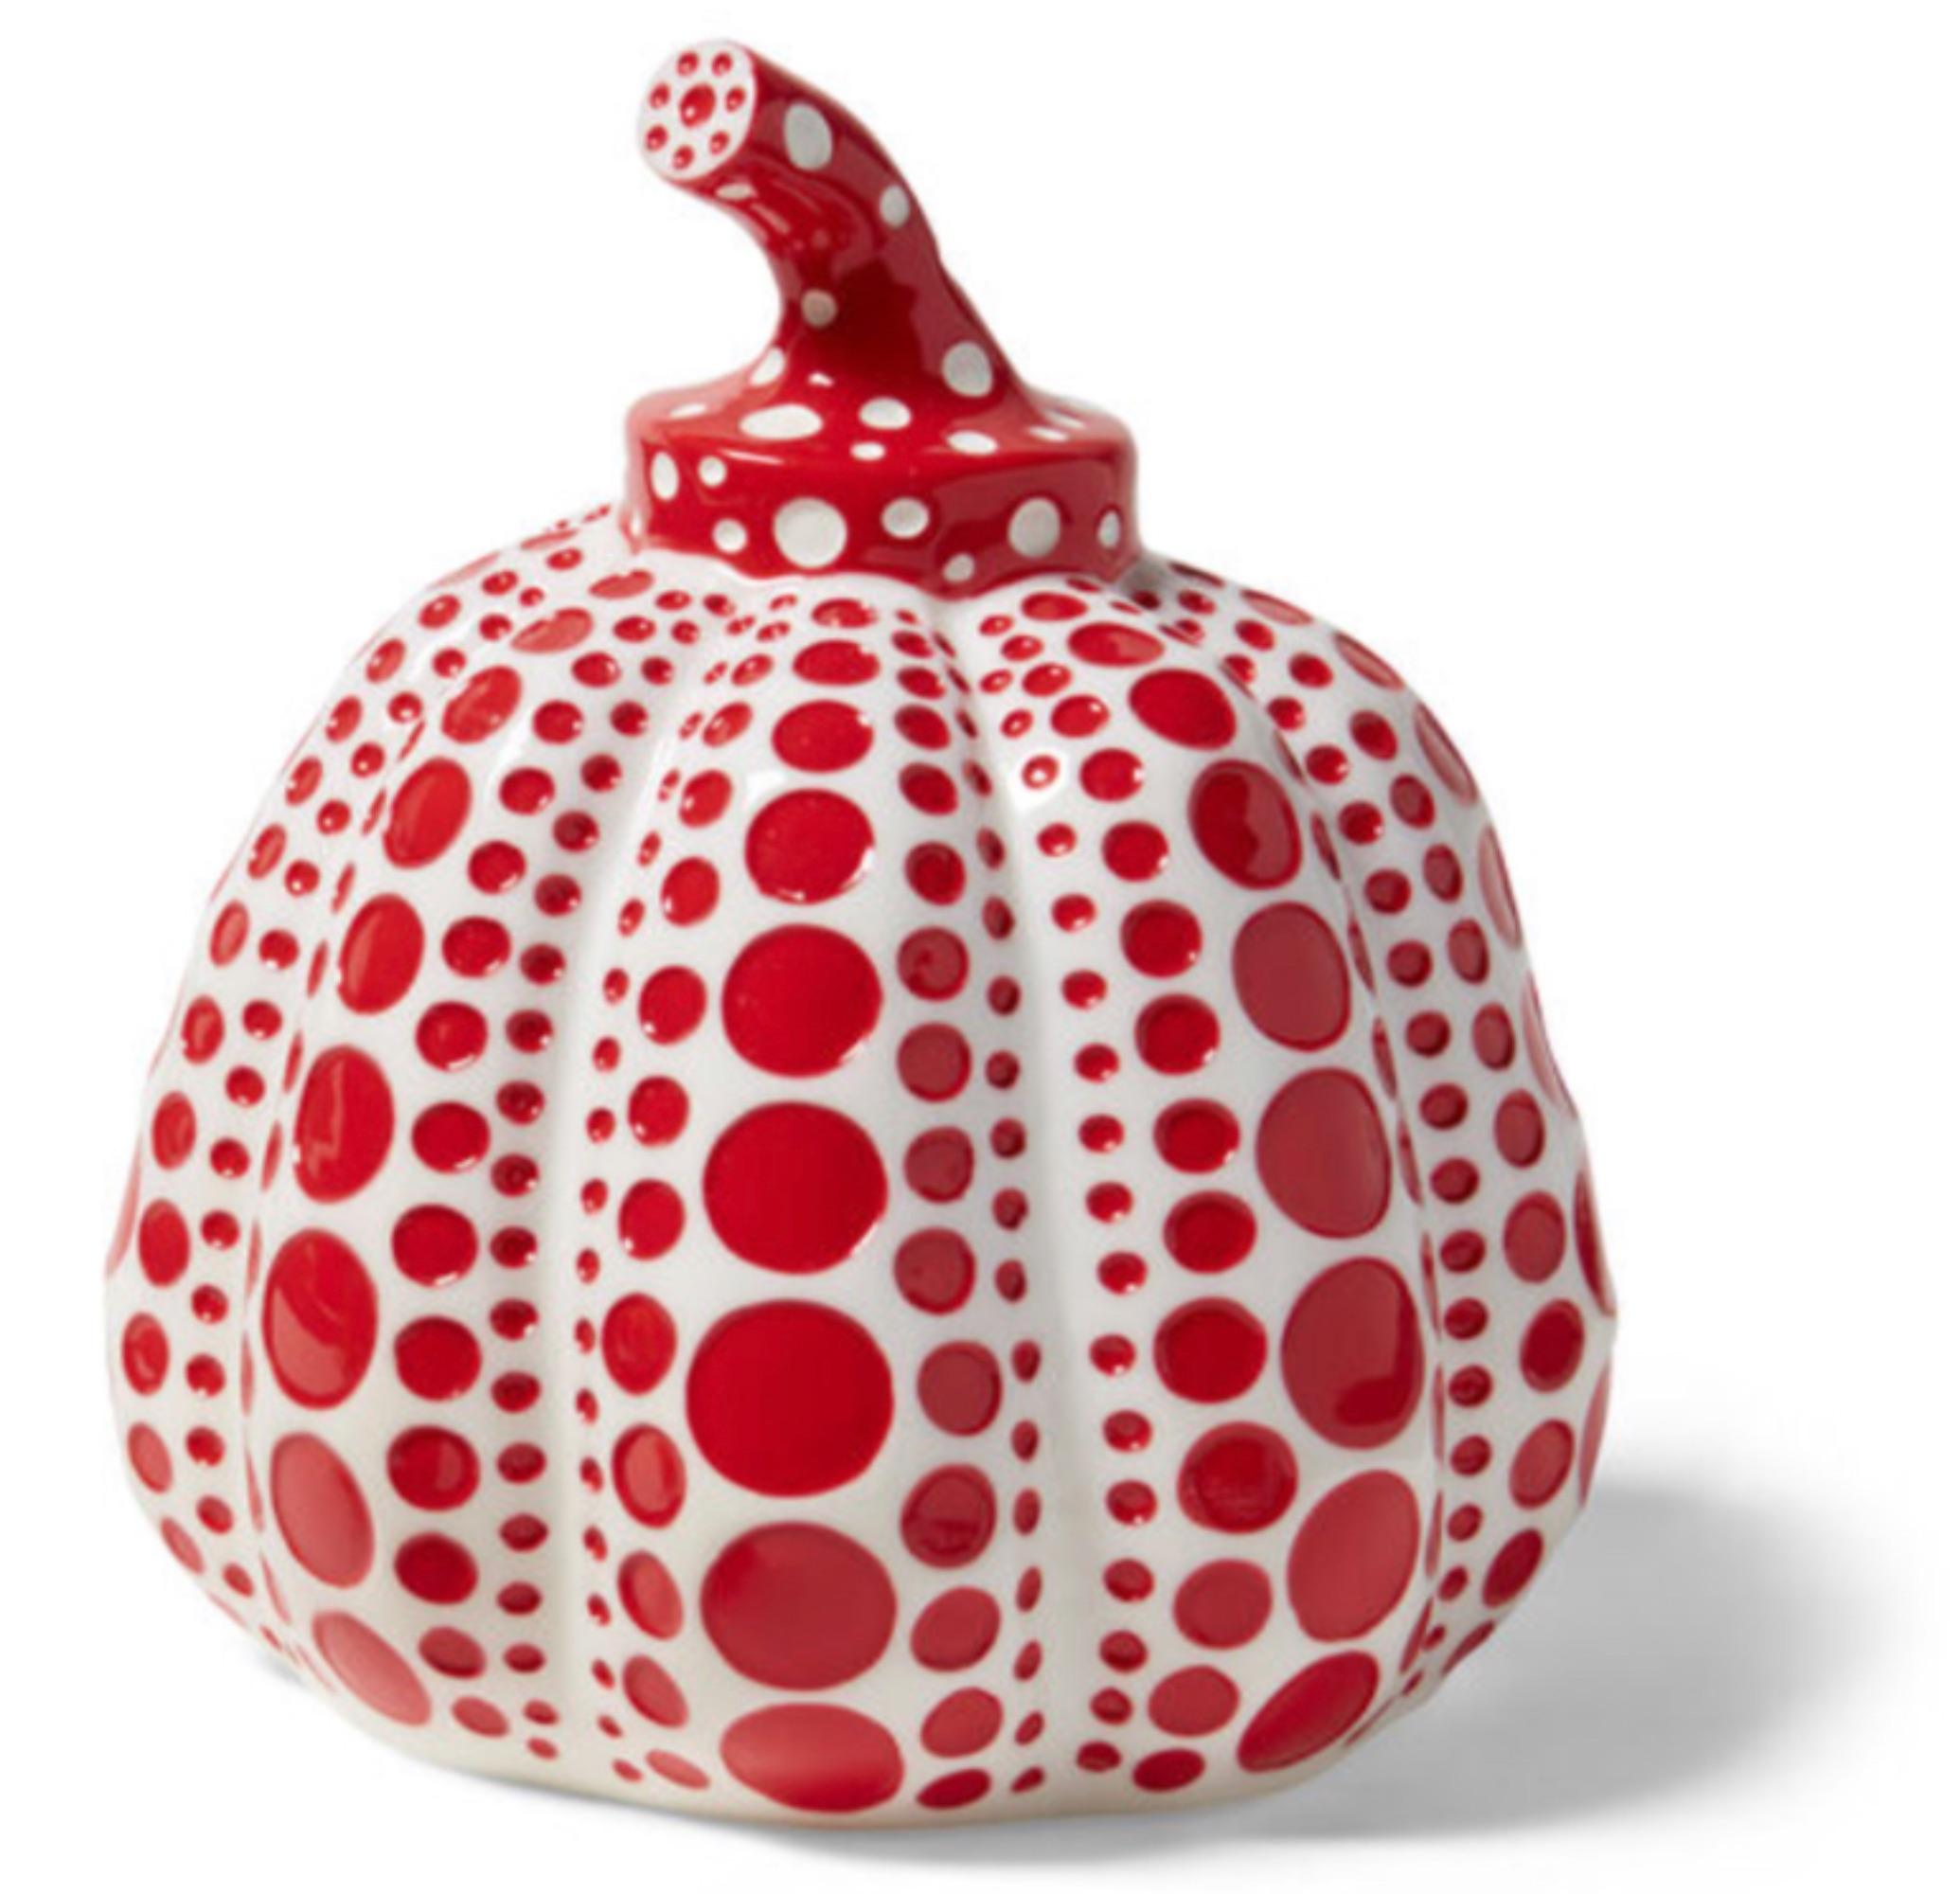 Pumpkins (Yellow & Black, Red & White) - Abstract Expressionist Sculpture by Yayoi Kusama